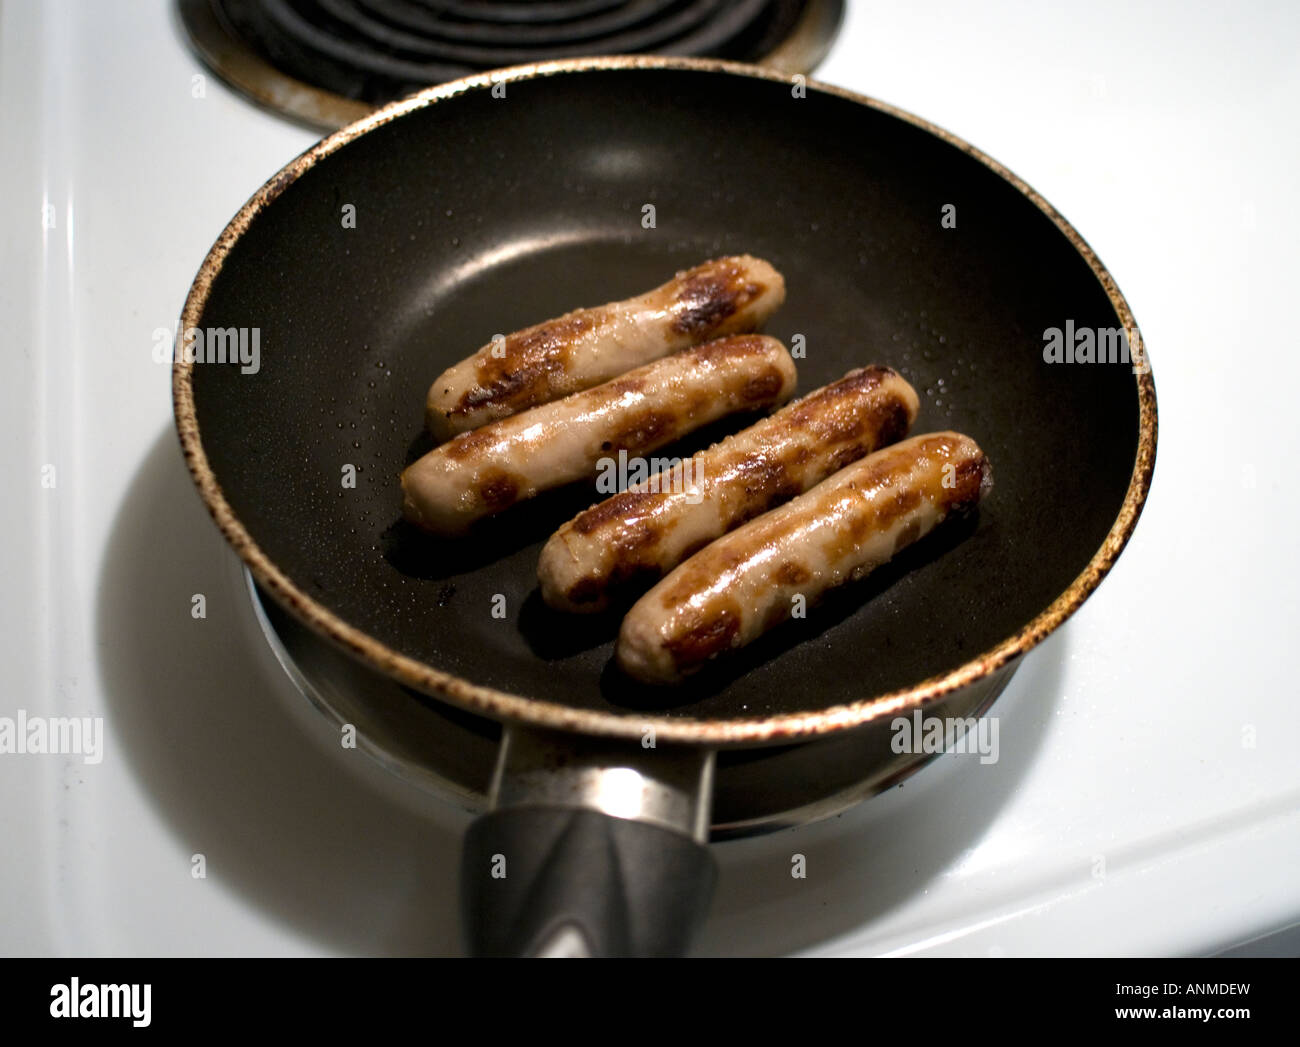 Four sausage links in a frying pan on a white stove Stock Photo